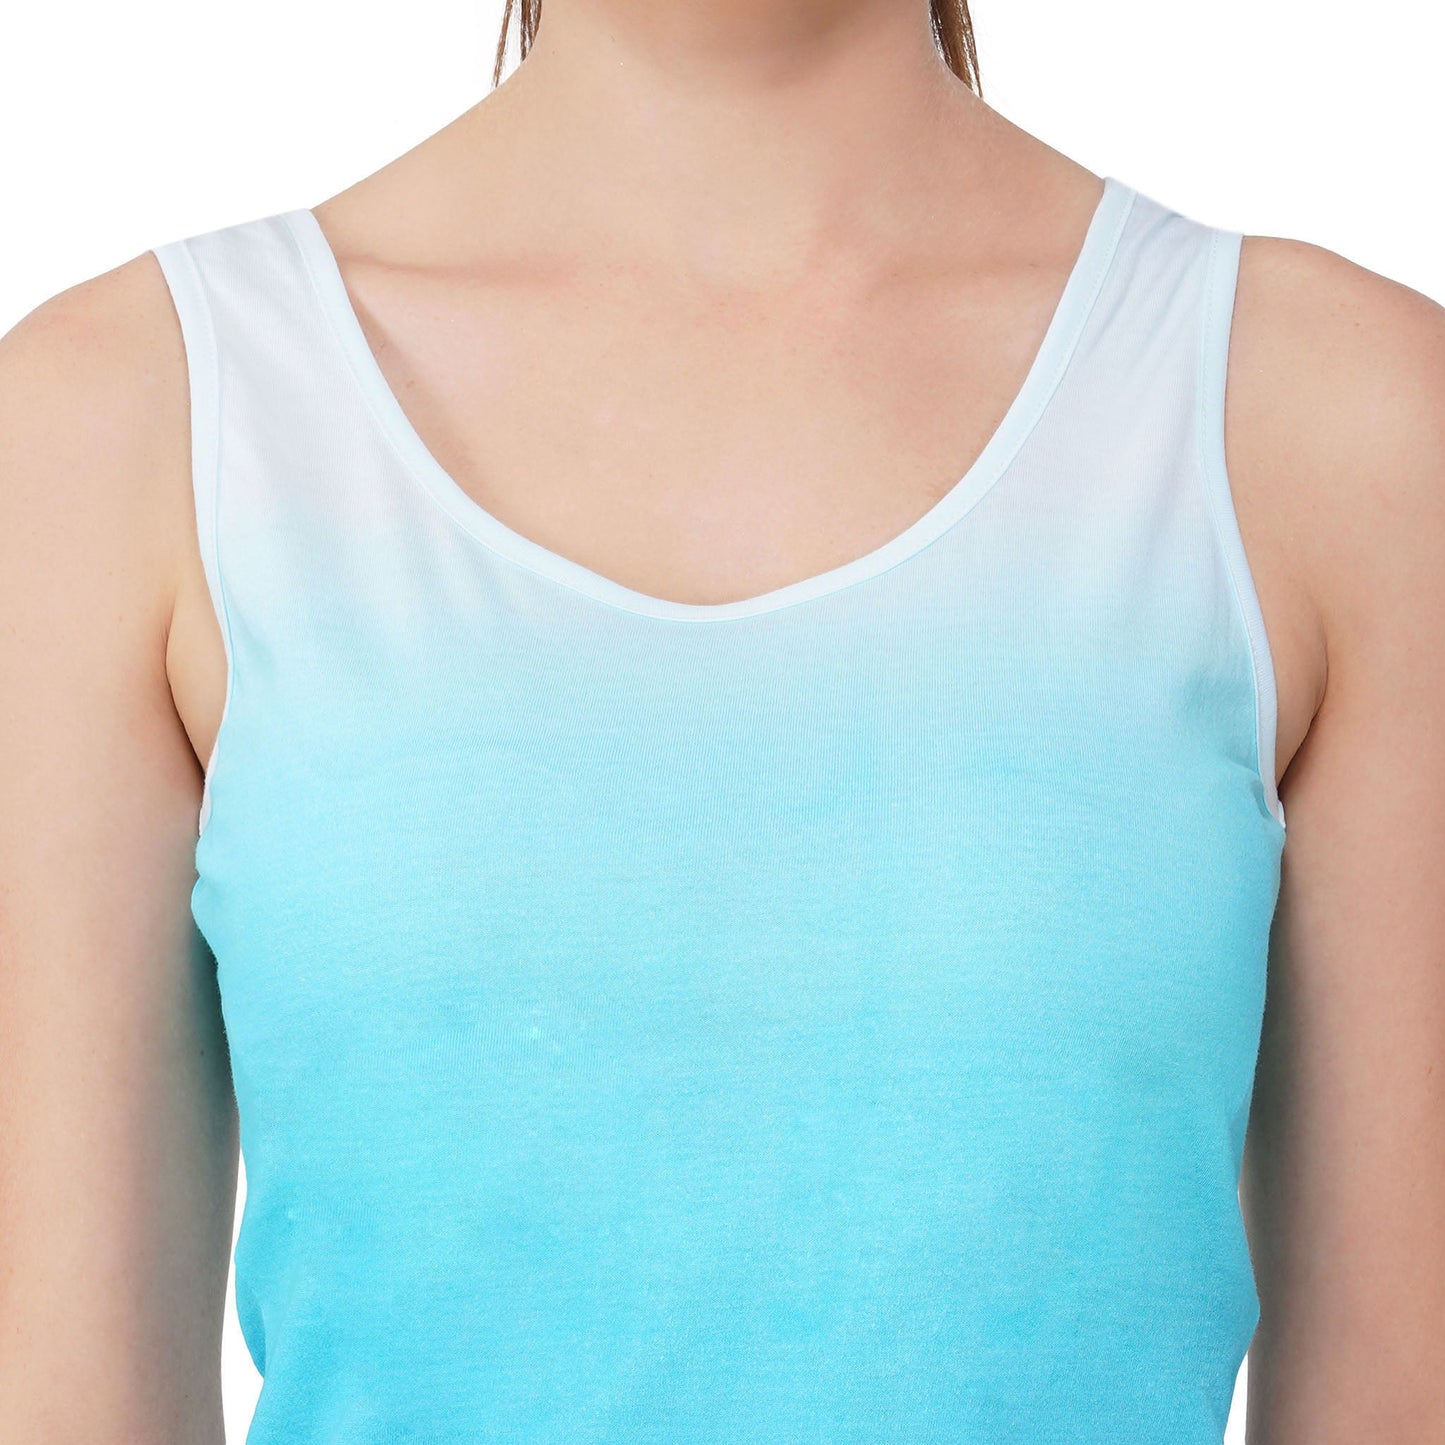 SLAY. Women's White to Blue Ombre Tank Top